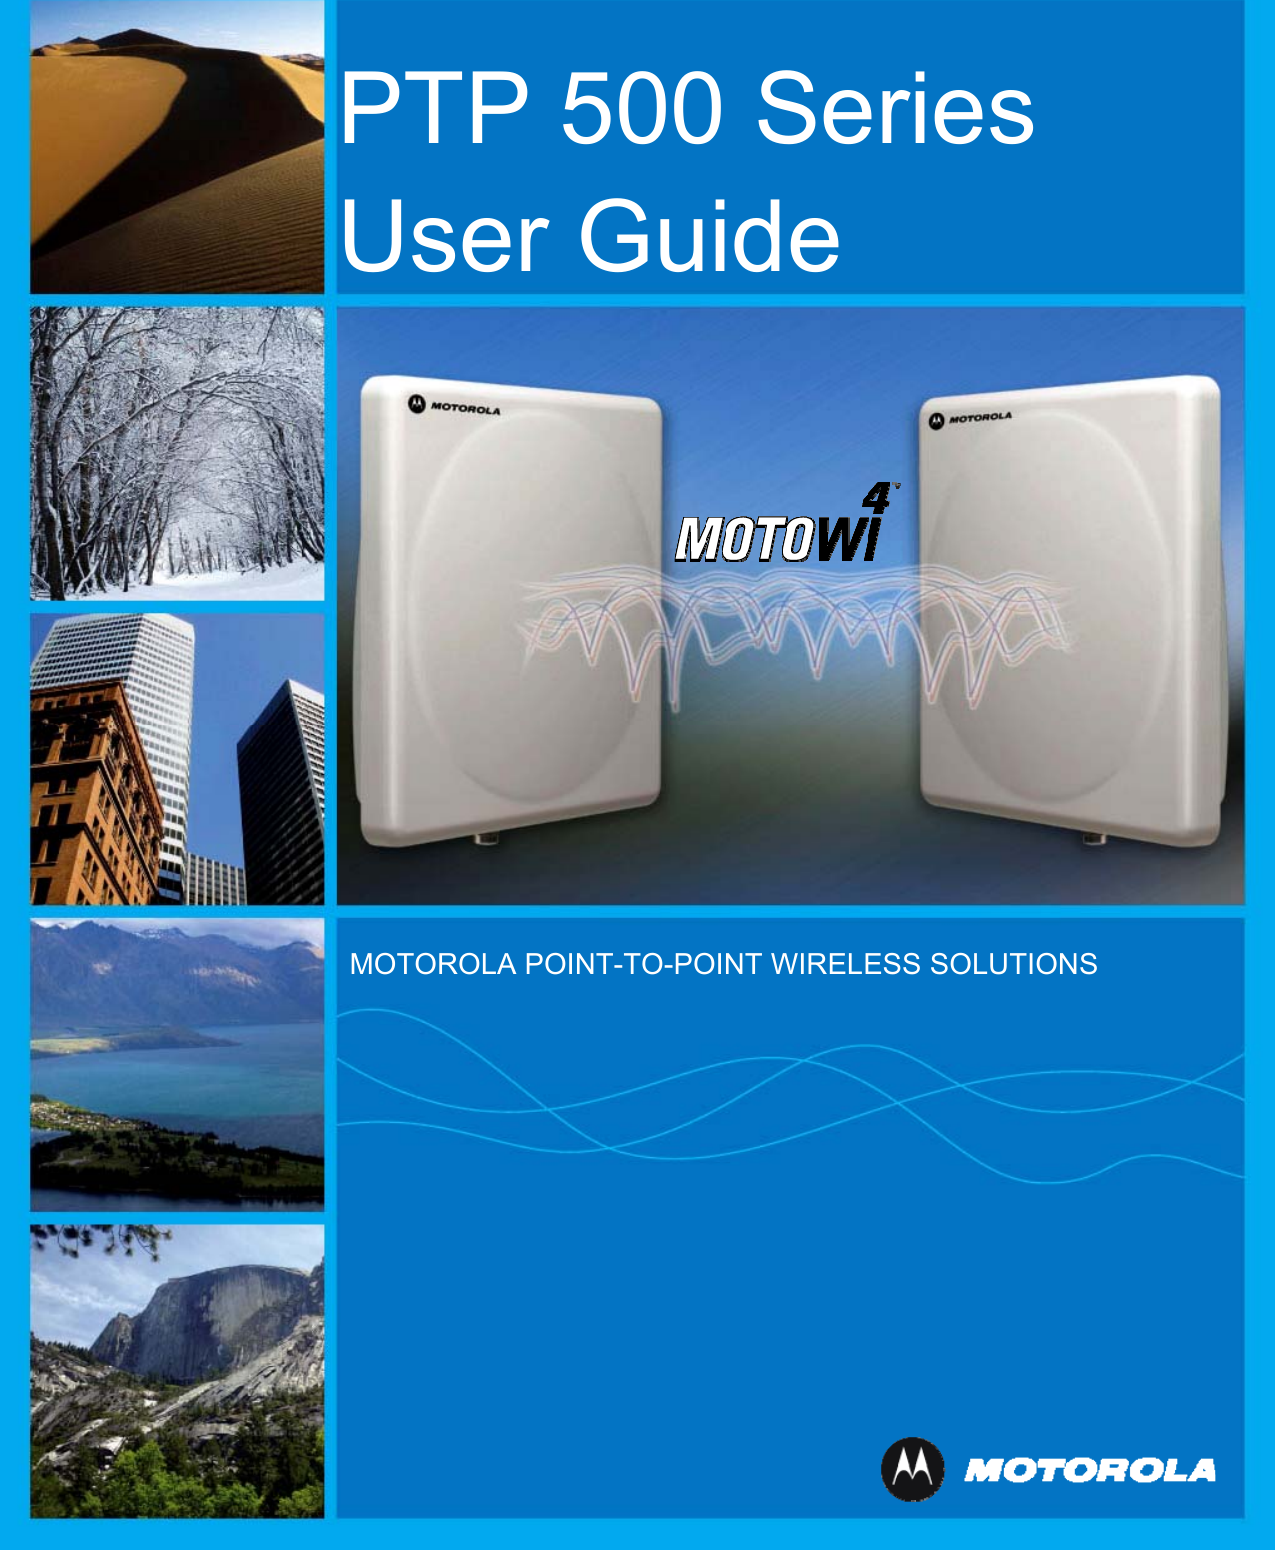 PTP 500 Series User Guide              MOTOROLA POINT-TO-POINT WIRELESS SOLUTIONS 